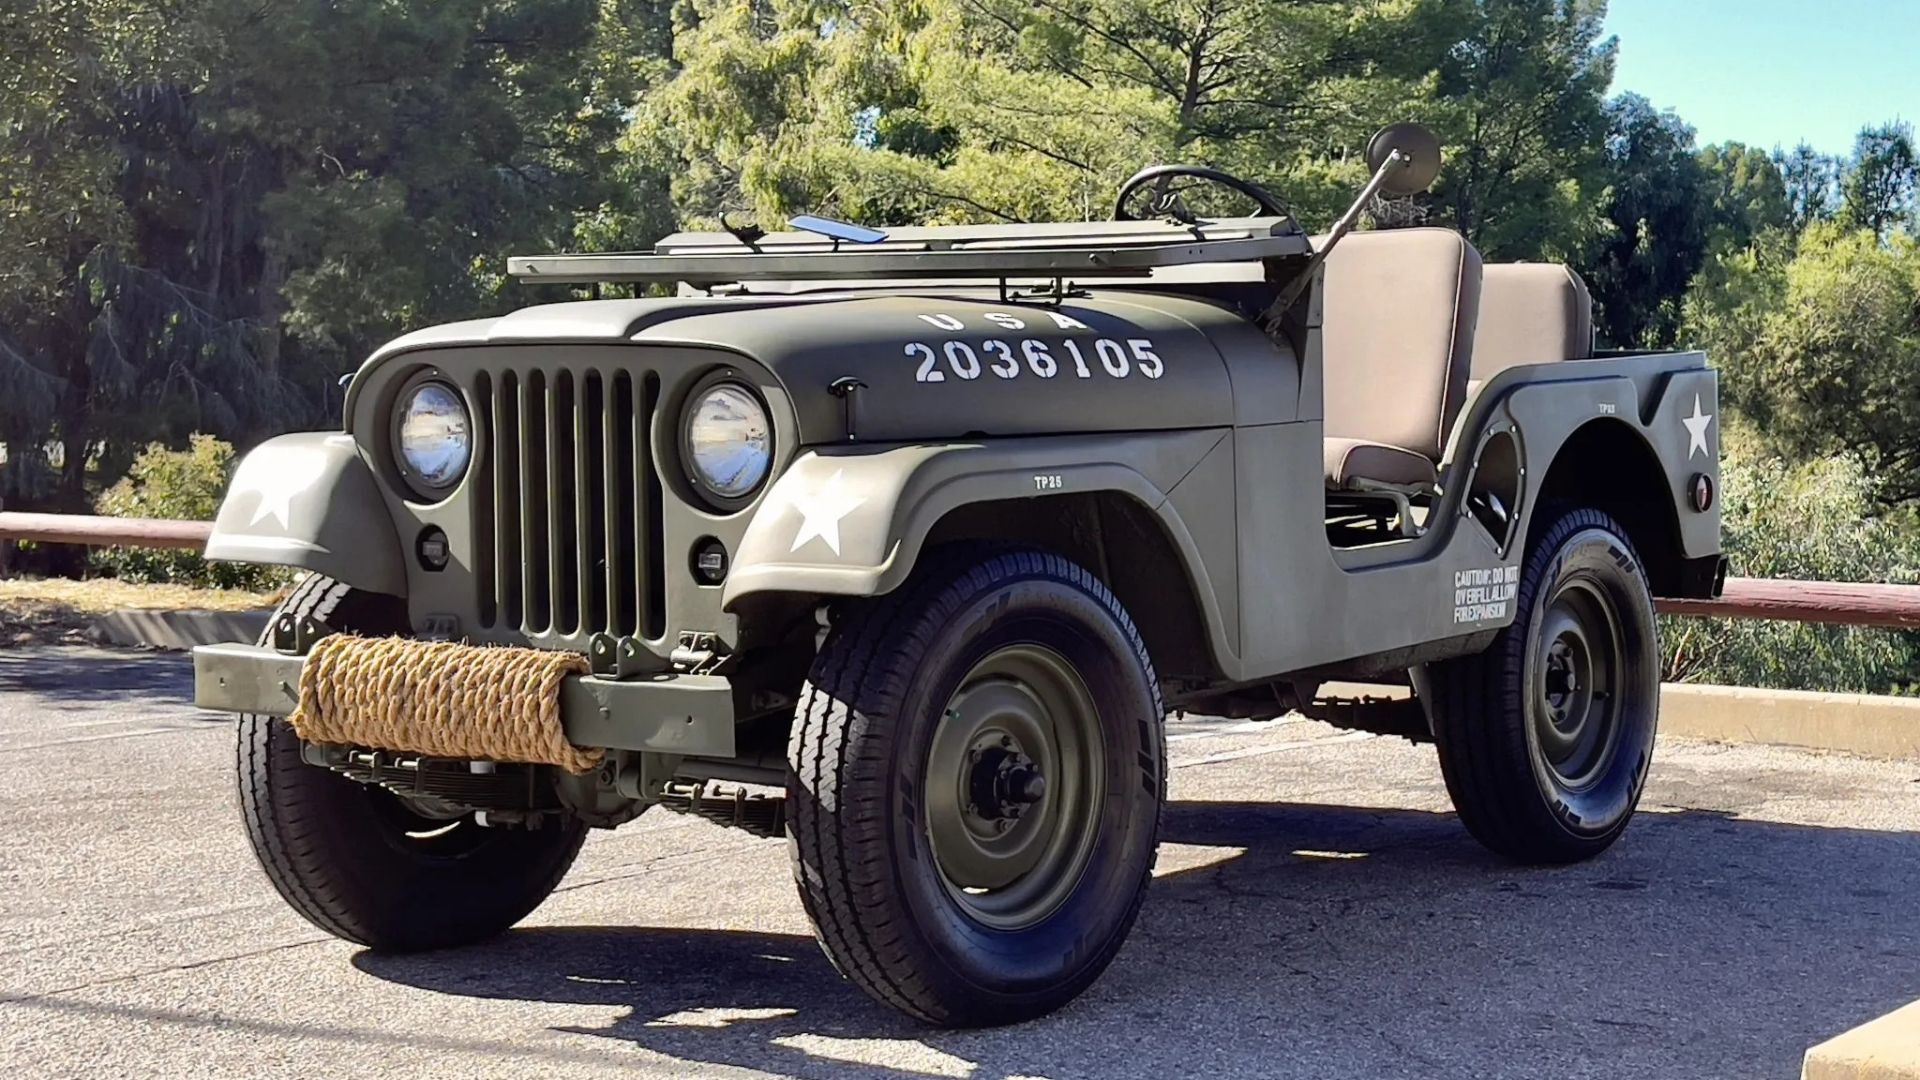 Army green Willys Jeep M38A1